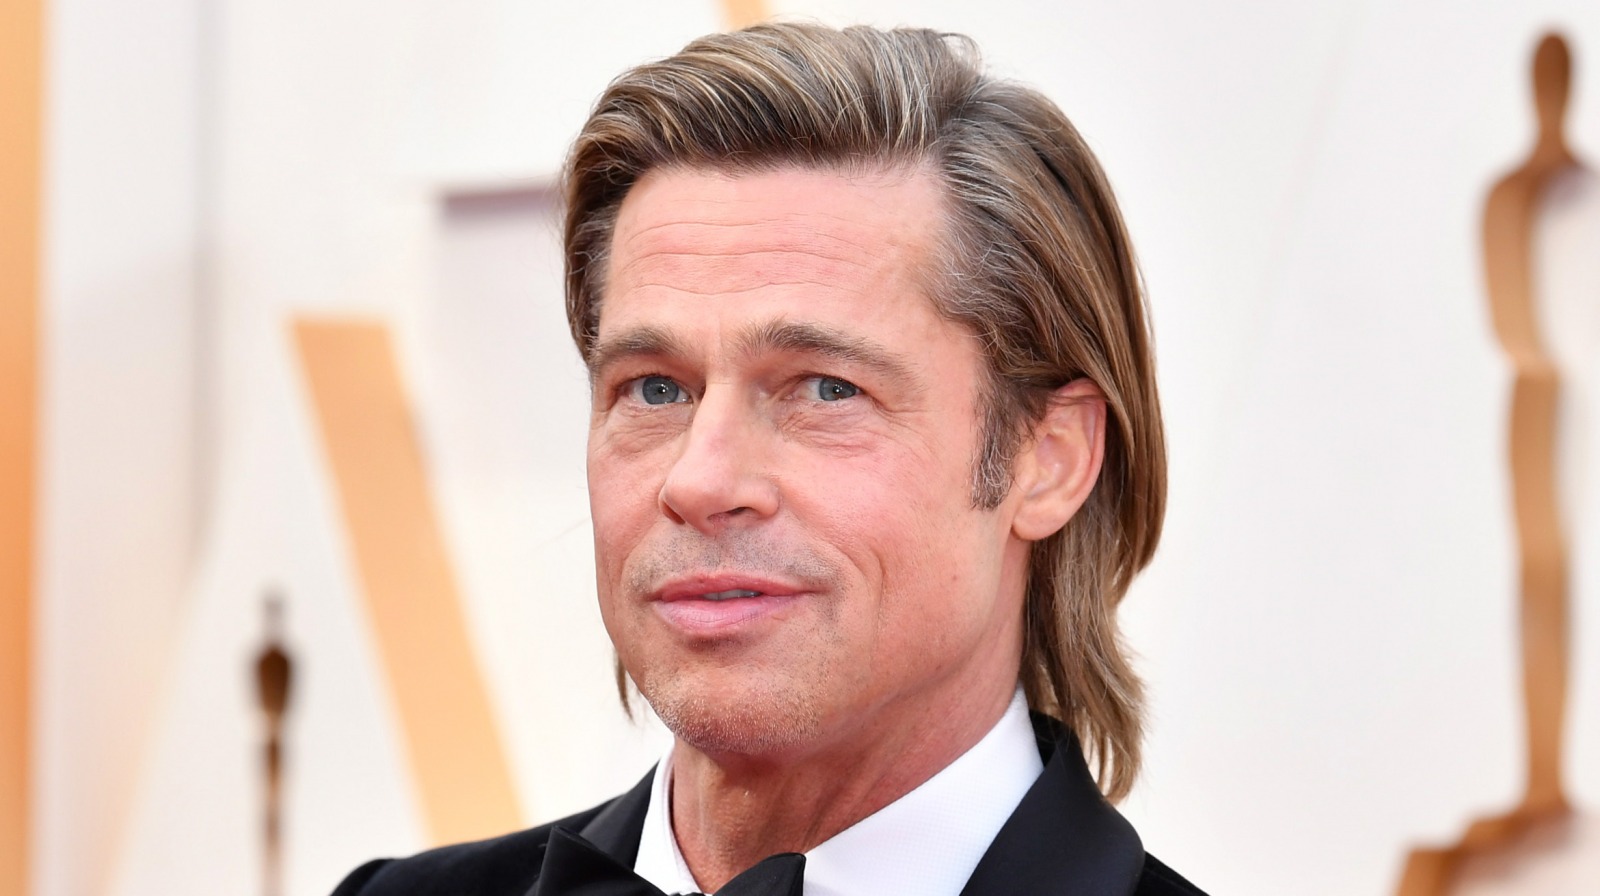 Behind the scenes of Brad Pitt's turbulent introduction to Scientology